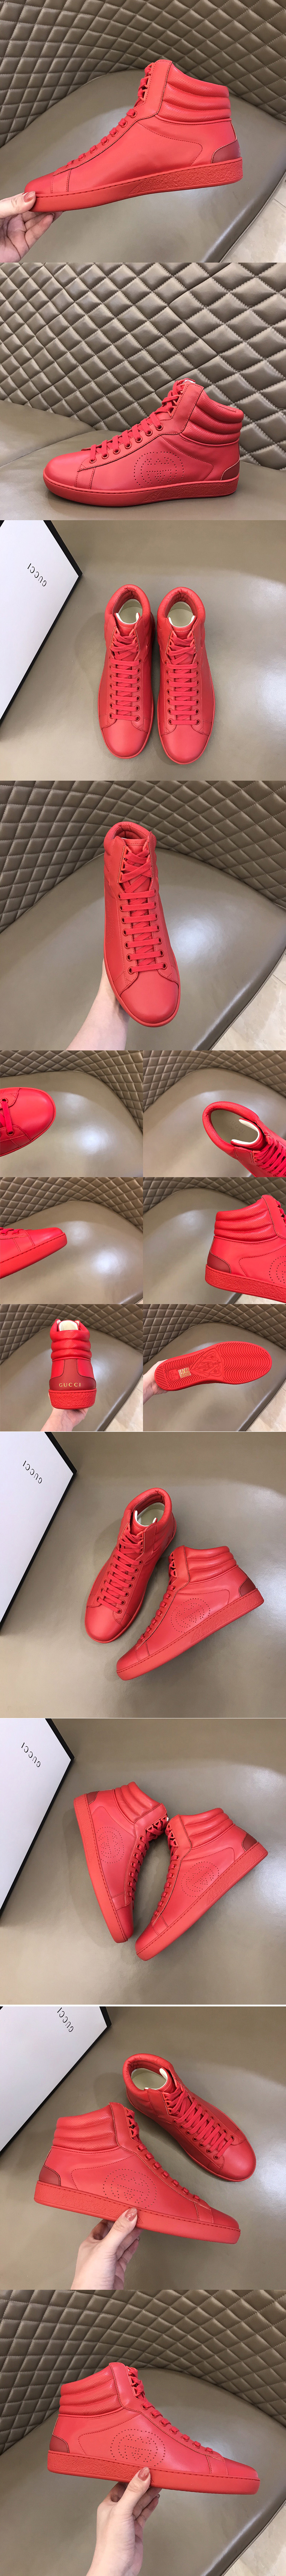 Replica Gucci 625672 Men's high-top Ace sneaker in Hibiscus red leather